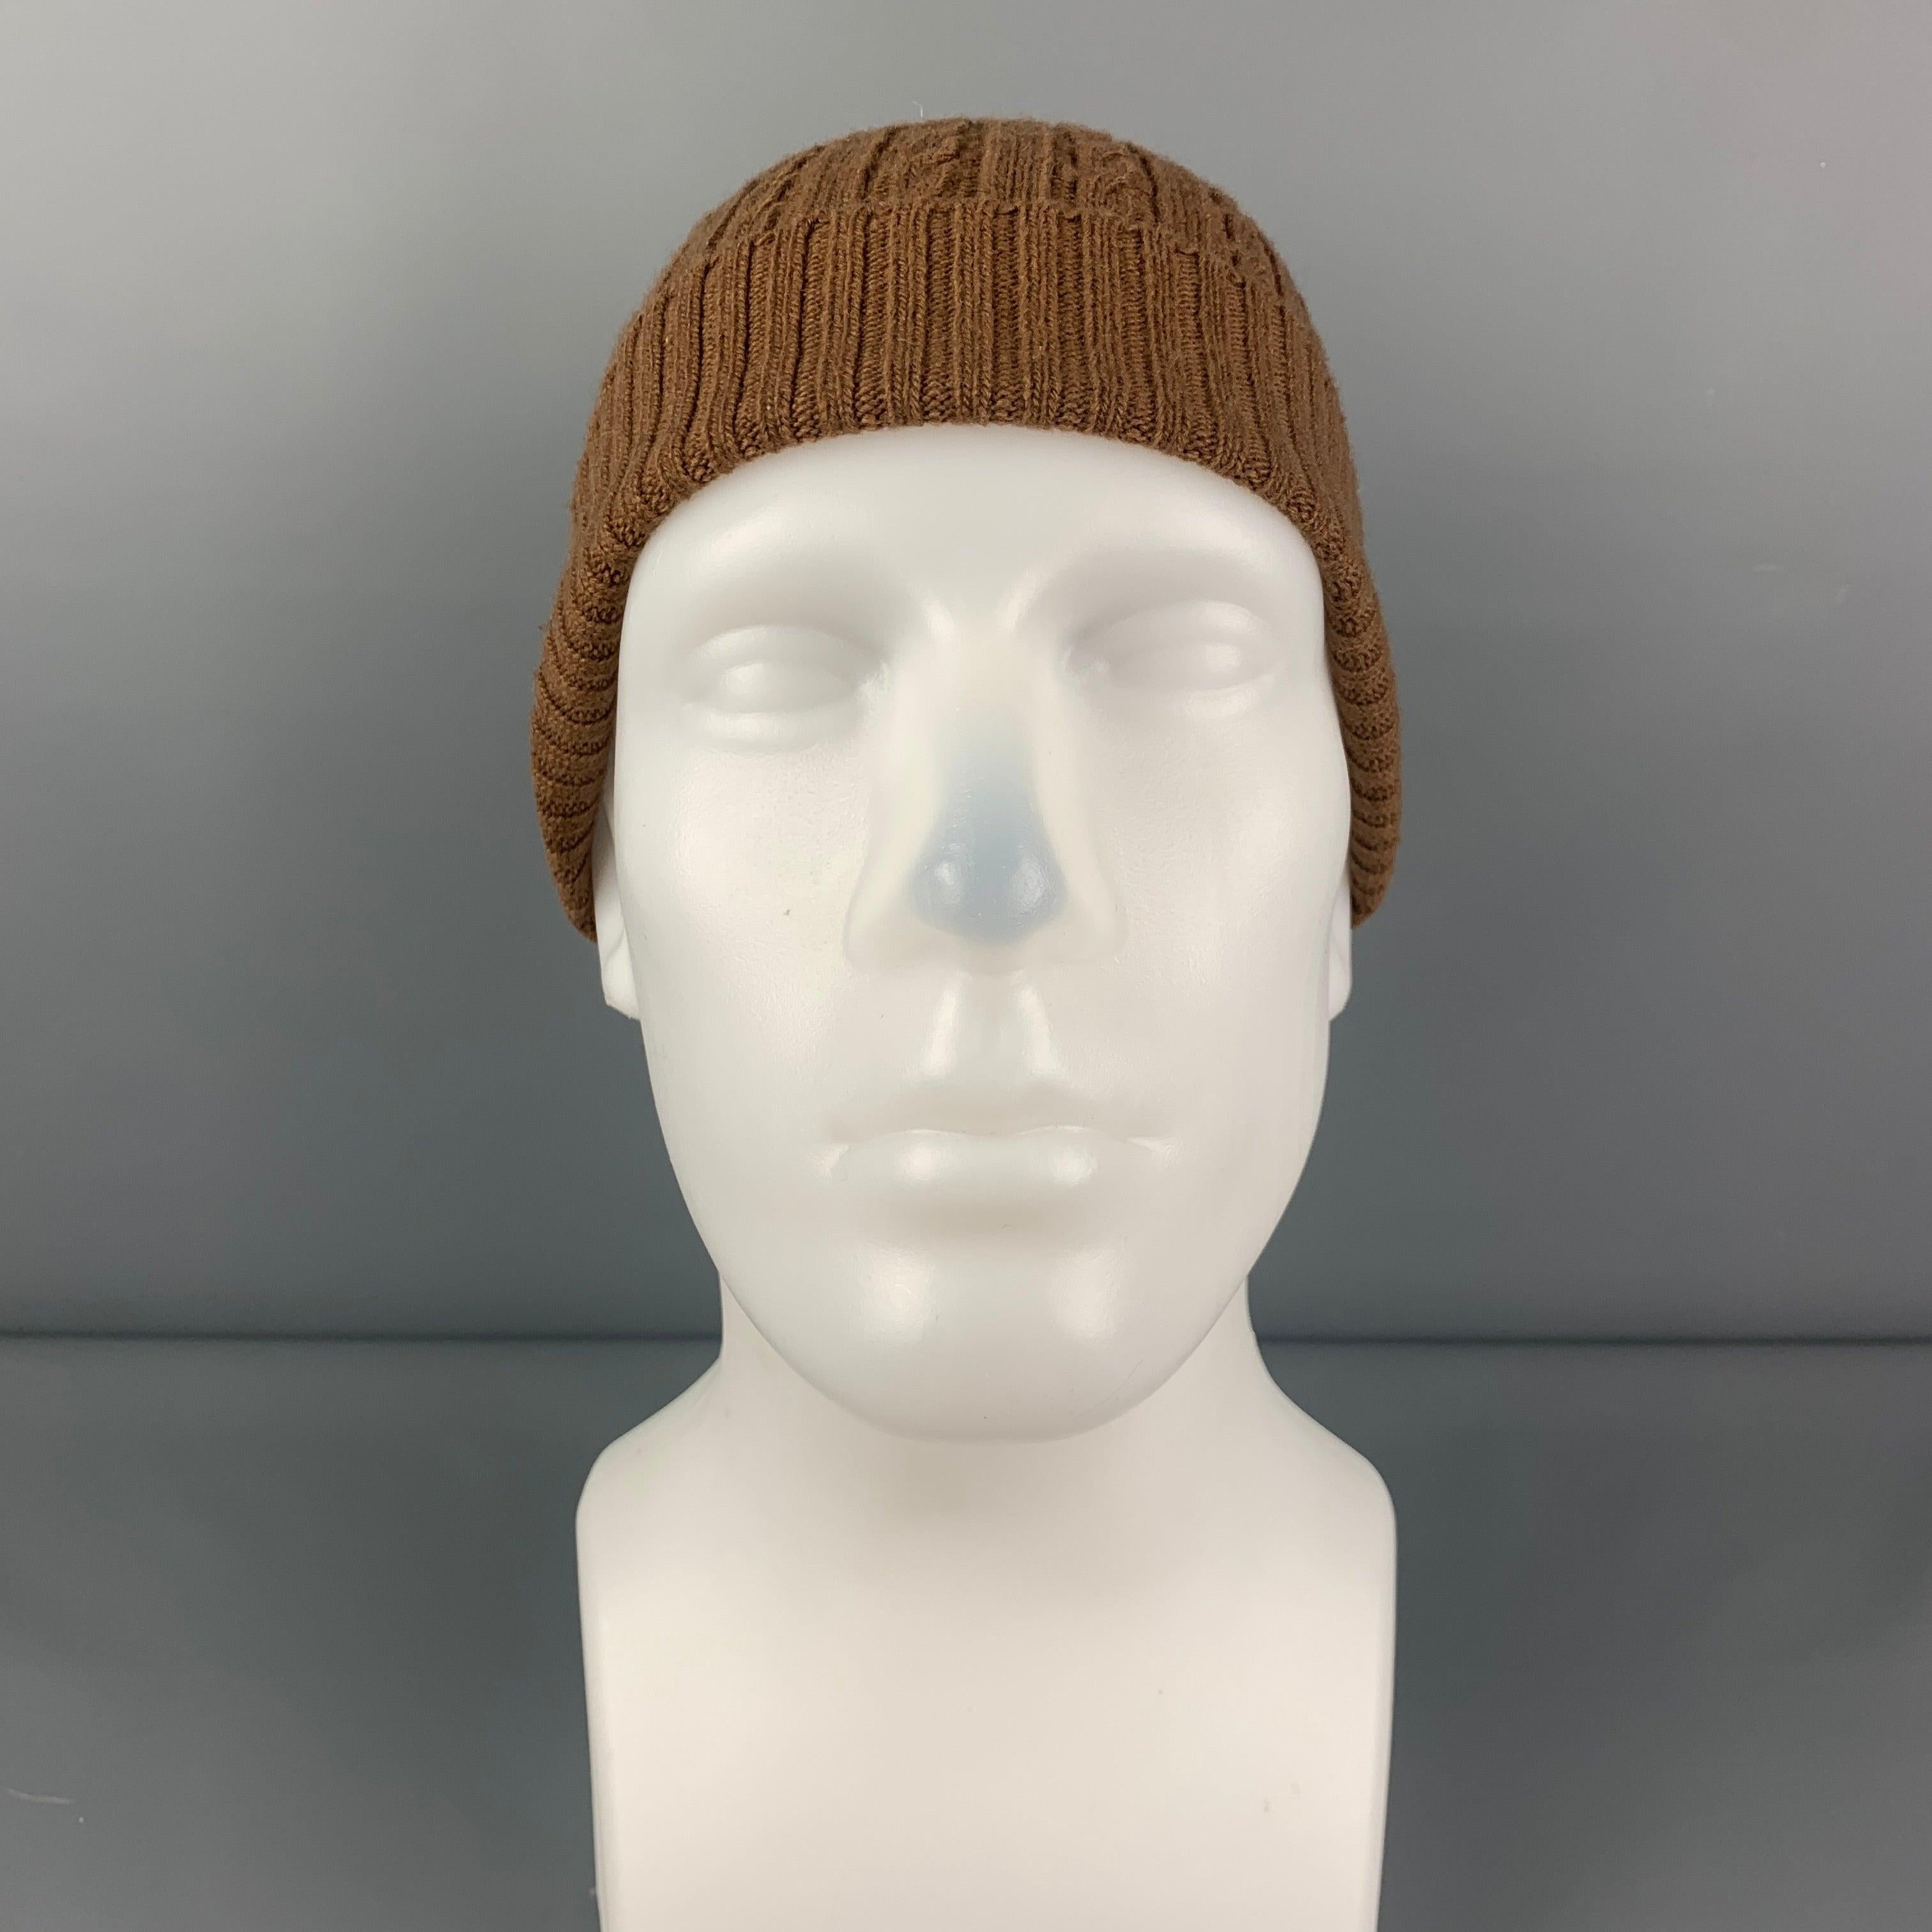 AMI by ALEXANDRE MATTIUSSI beanie comes in a brown knitted wool. Made in Italy.
 Very Good
 Pre-Owned Condition. 
 

 Marked:  Size tag removed.  
 

 Measurements: 
  Opening: 20 inches Height: 9.5 inches 
  
  
  
 Sui Generis Reference: 103185
